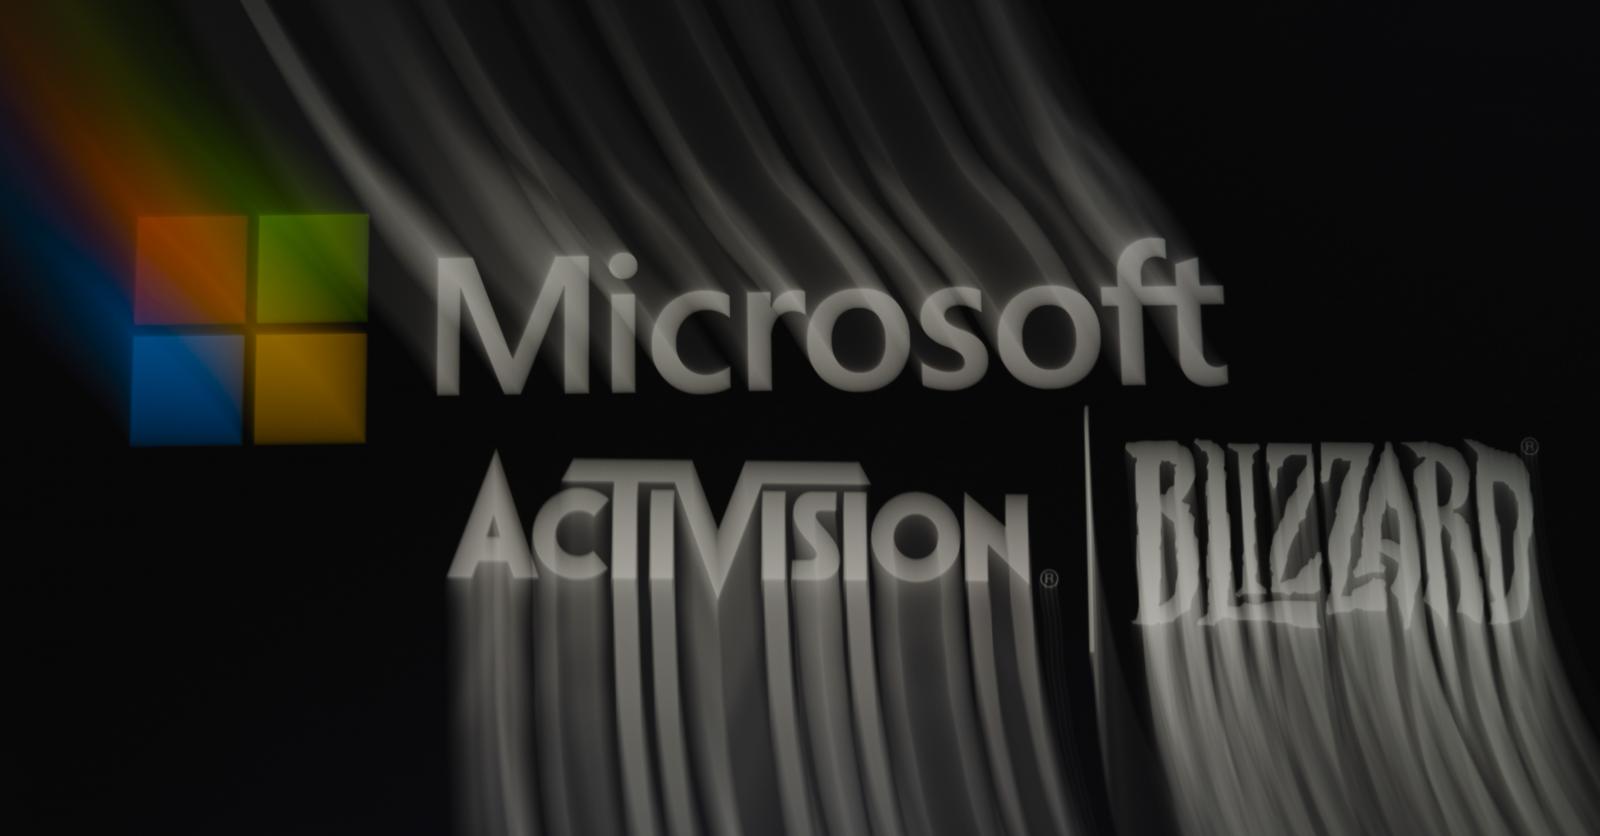 Microsoft has missed the deadline for the $69 billion Activision Blizzard deal